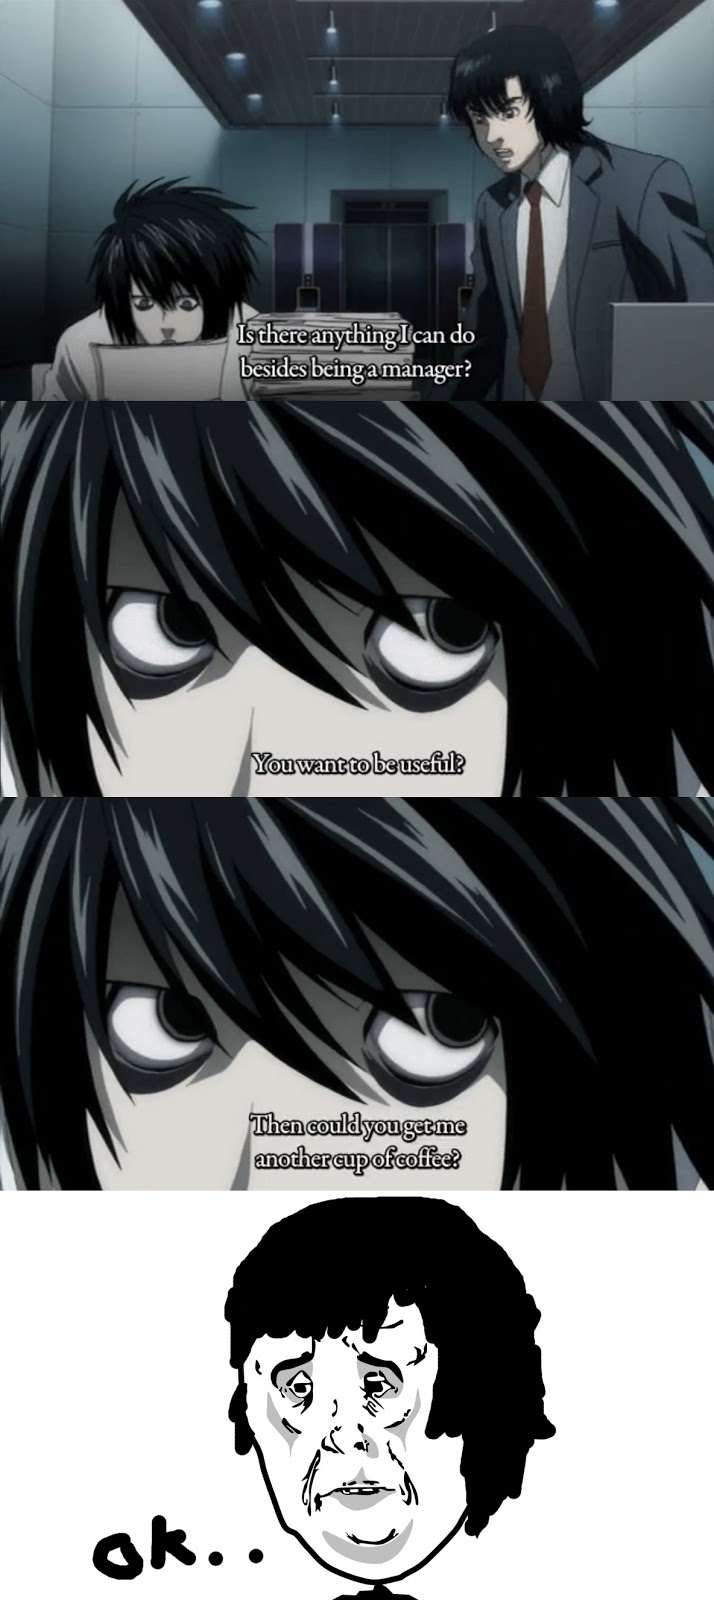 My Life, My Story: DEATH NOTE MEME